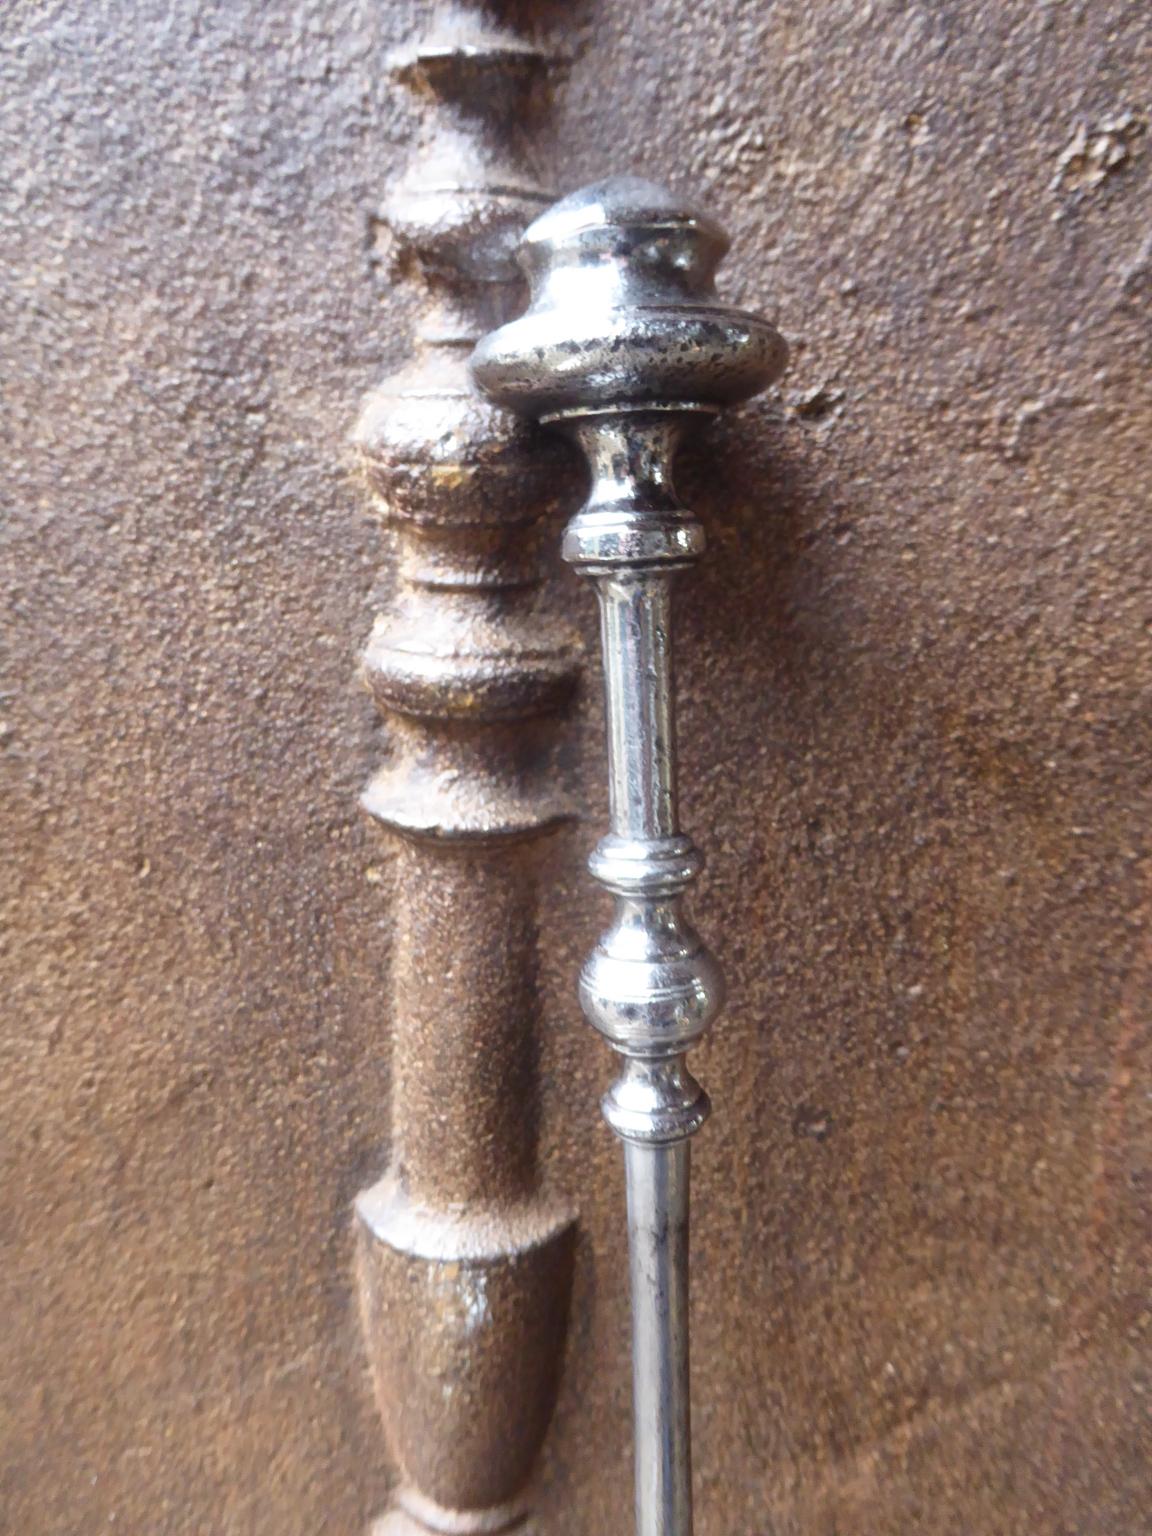 18th-19th century, English fireplace poker made of polished steel.








